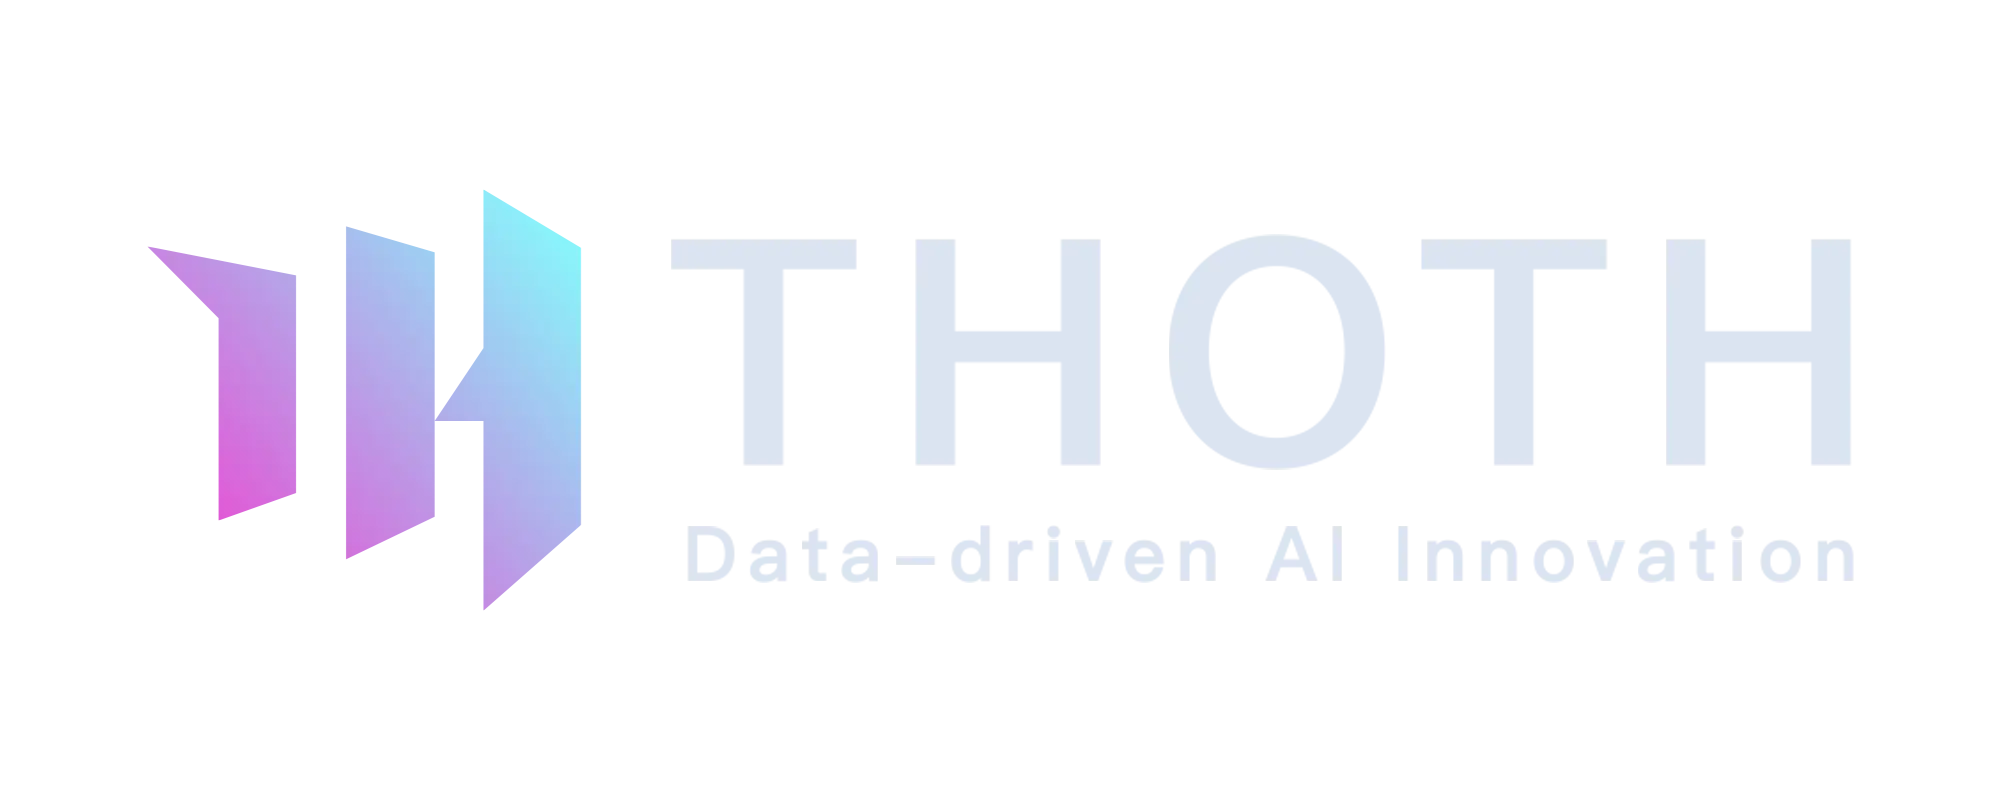 A company logo featuring the name "Thoth" written in a stylized font, colored blue and purple. The text sits above a two-toned abstract design in the same color scheme.